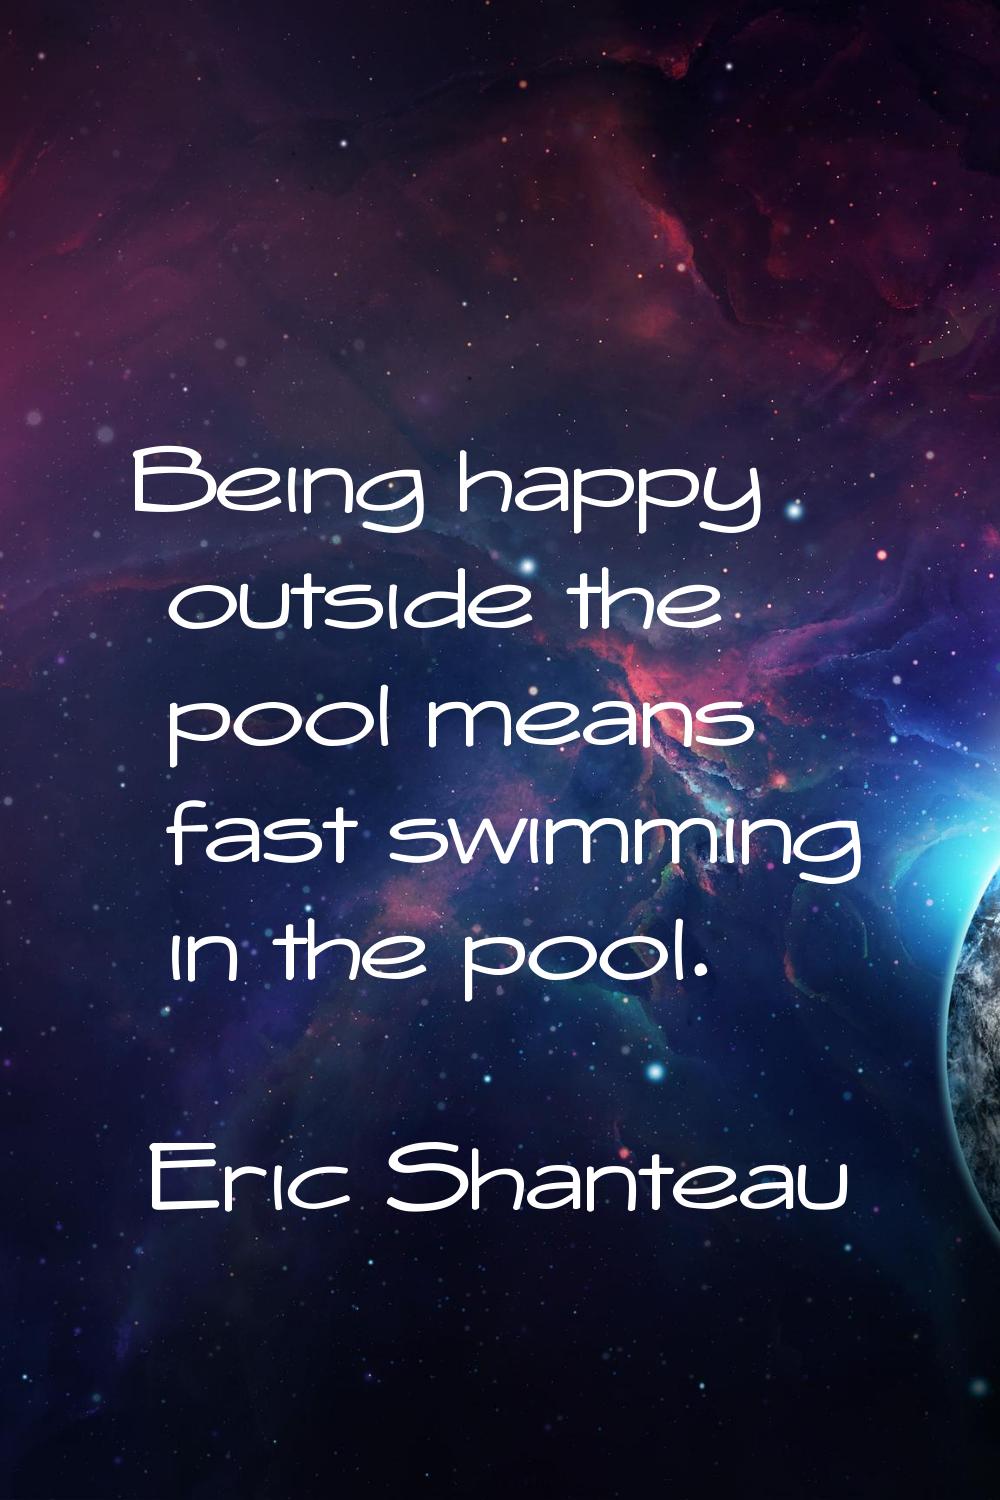 Being happy outside the pool means fast swimming in the pool.